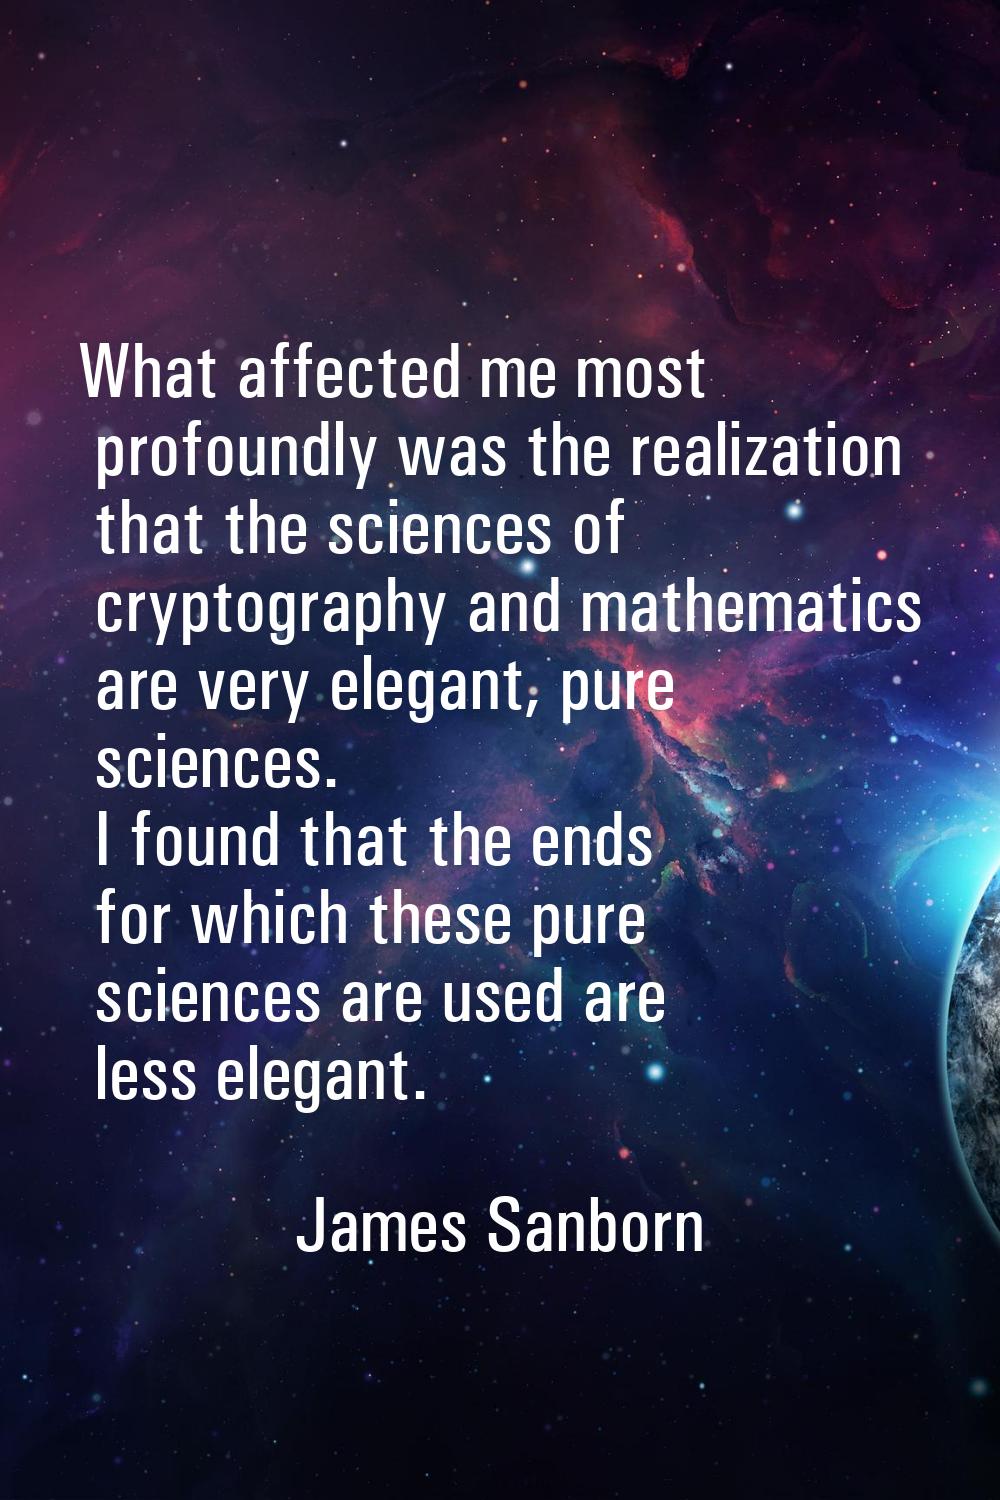 What affected me most profoundly was the realization that the sciences of cryptography and mathemat